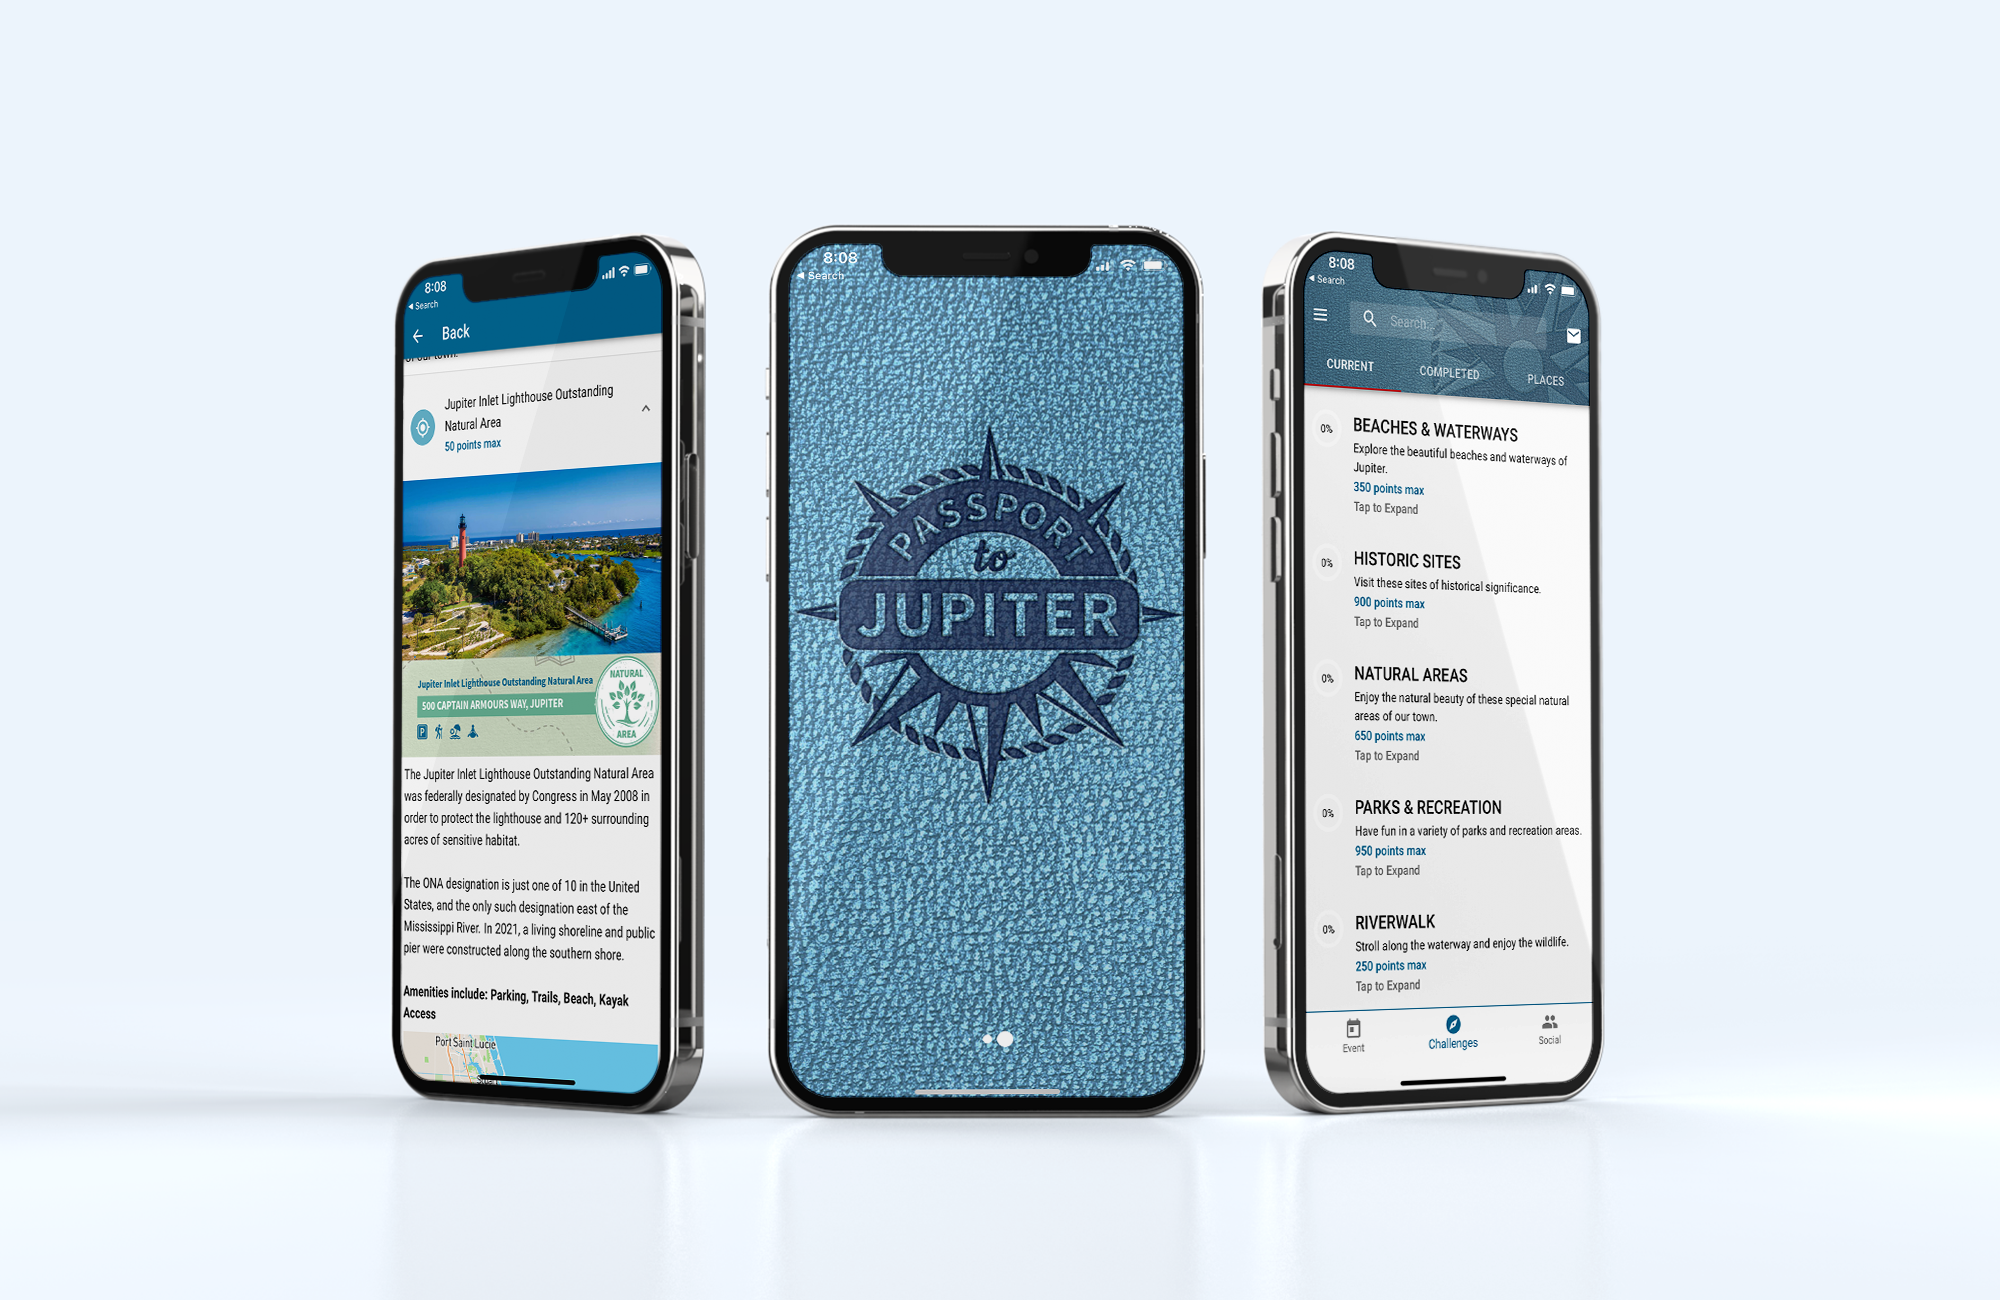 image with three phones showing different screenshots of the passport to jupiter scavenger hunt app. The left phone is facing outwards and has a screenshot with an image that looks like a lighthouse.